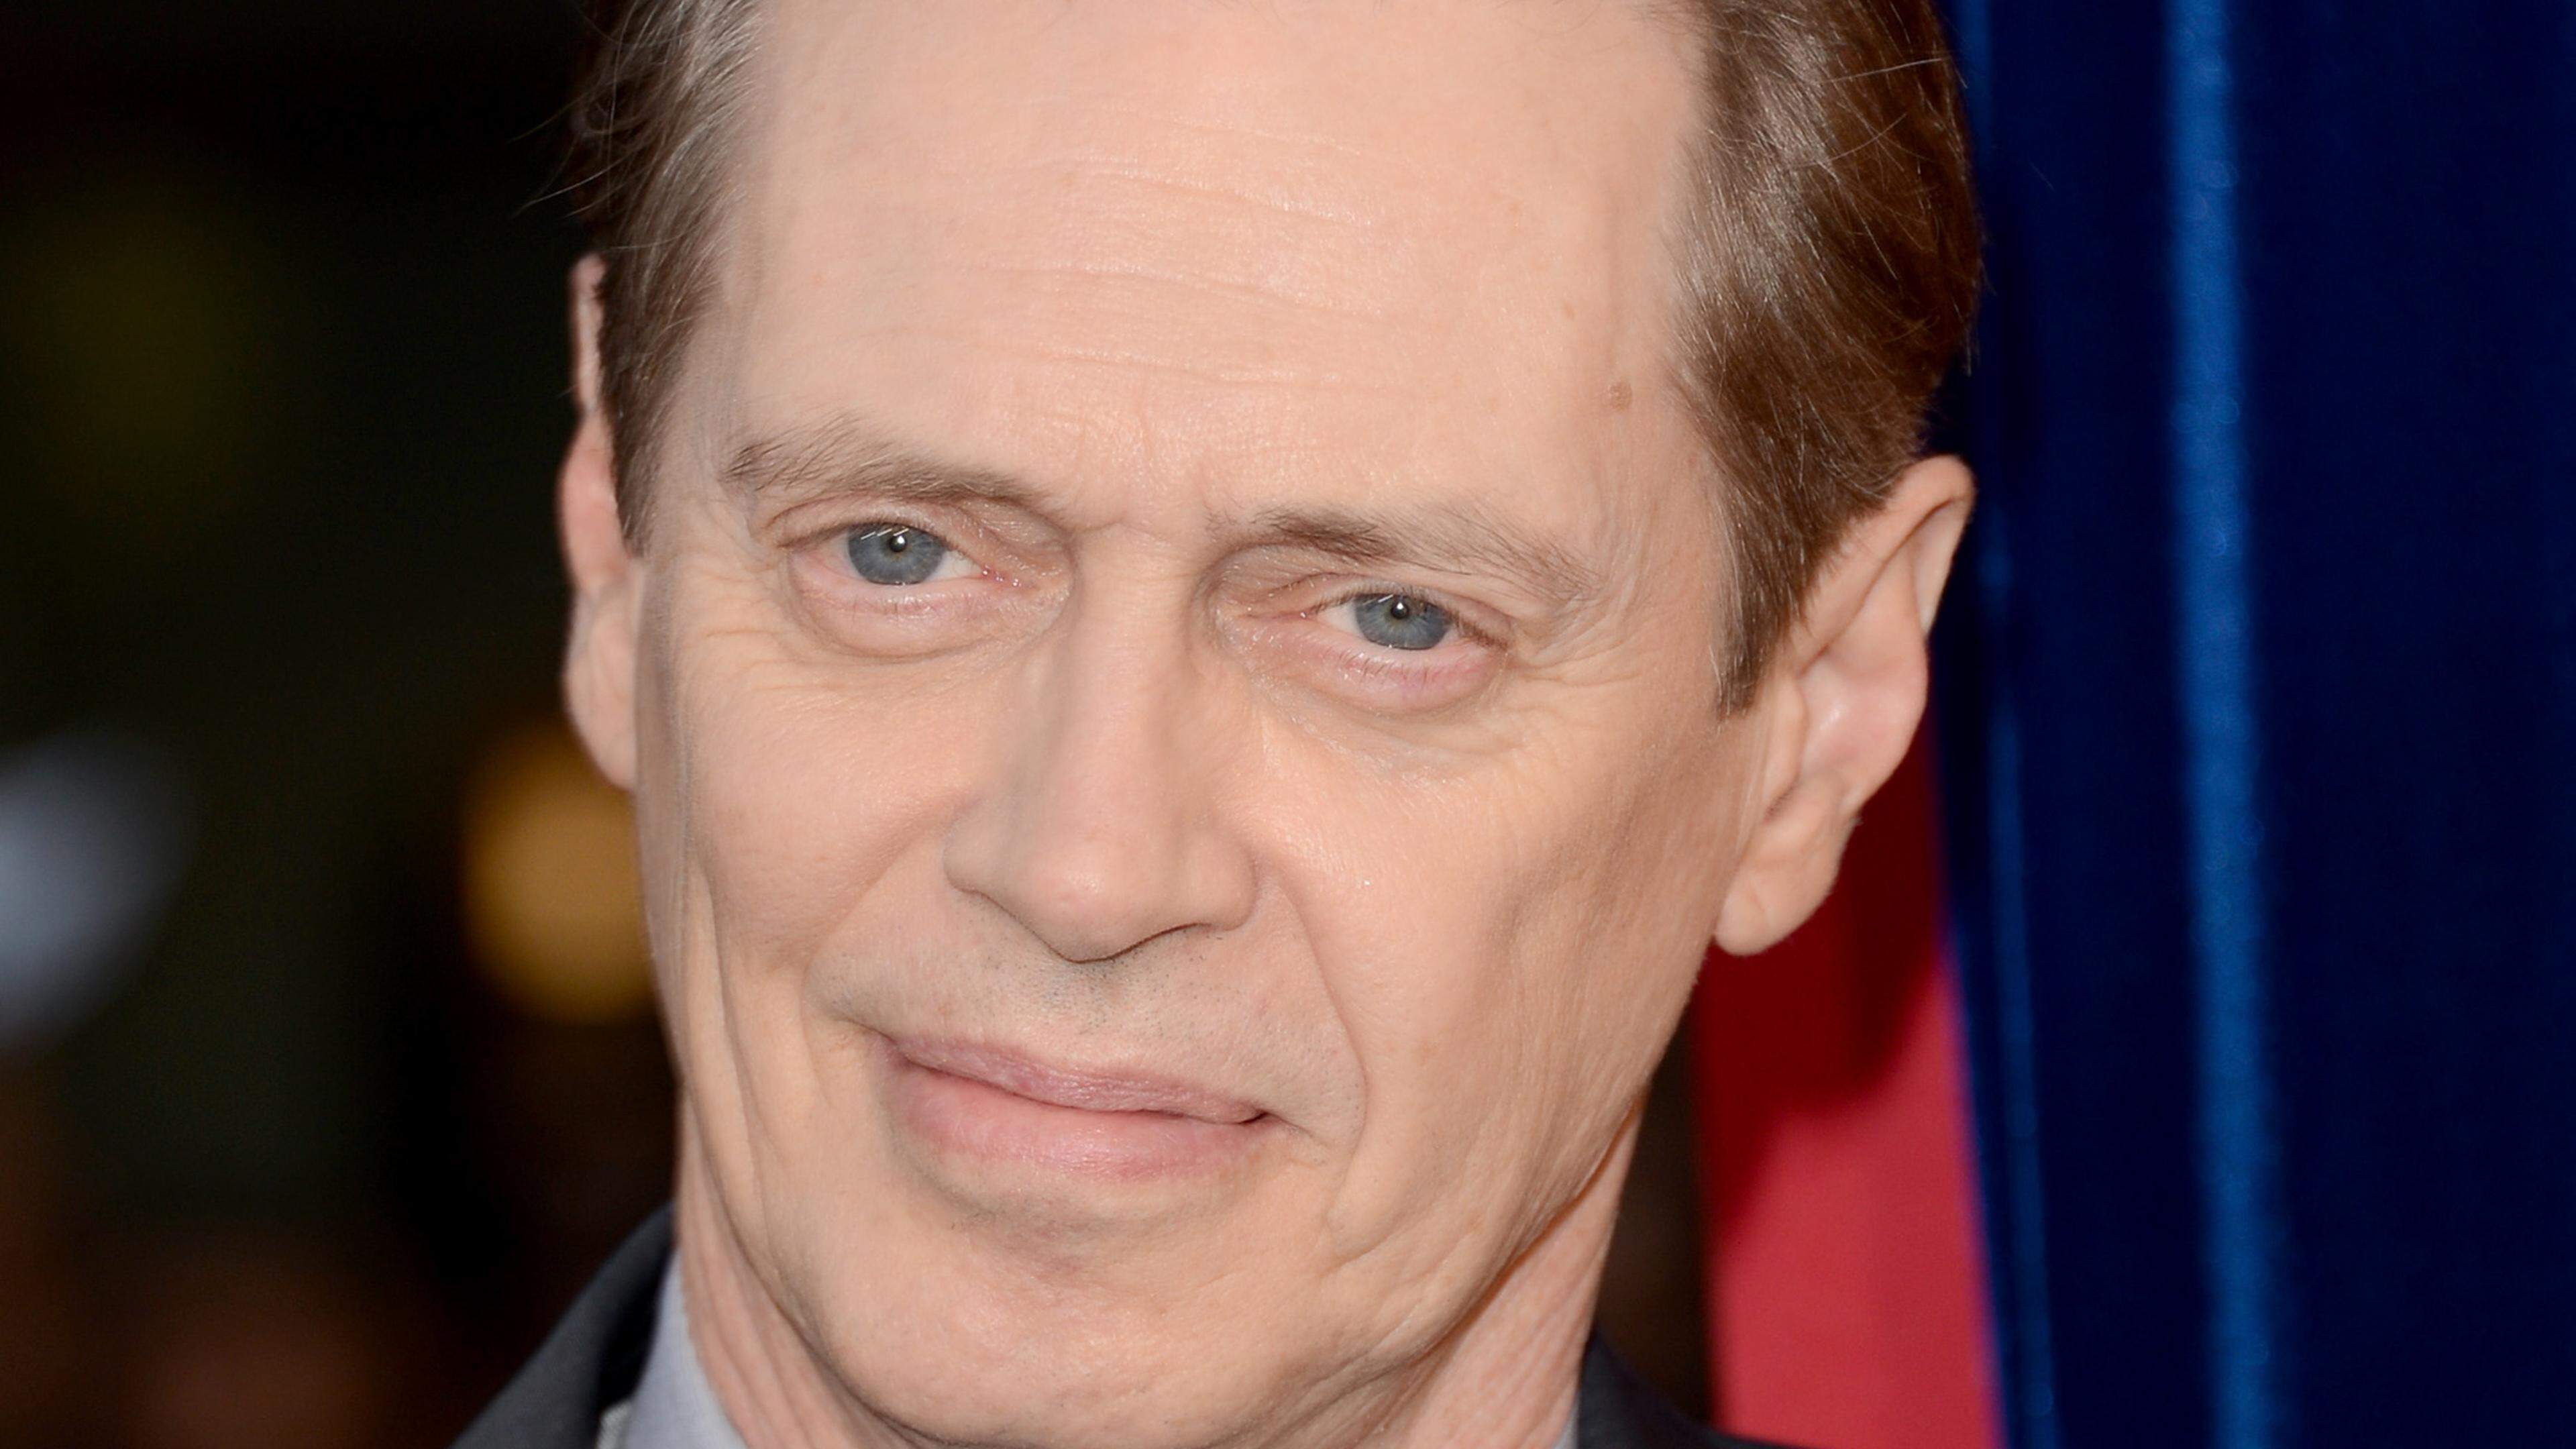 HOLLYWOOD, CA - MARCH 11: Actor Steve Buscemi attends the premiere of Warner Bros. Pictures' "The Incredible Burt Wonderstone" at TCL Chinese Theatre on March 11, 2013 in Hollywood, California.   Jason Merritt/Getty Images/AFP== FOR NEWSPAPERS, INTERNET, TELCOS & TELEVISION USE ONLY ==
